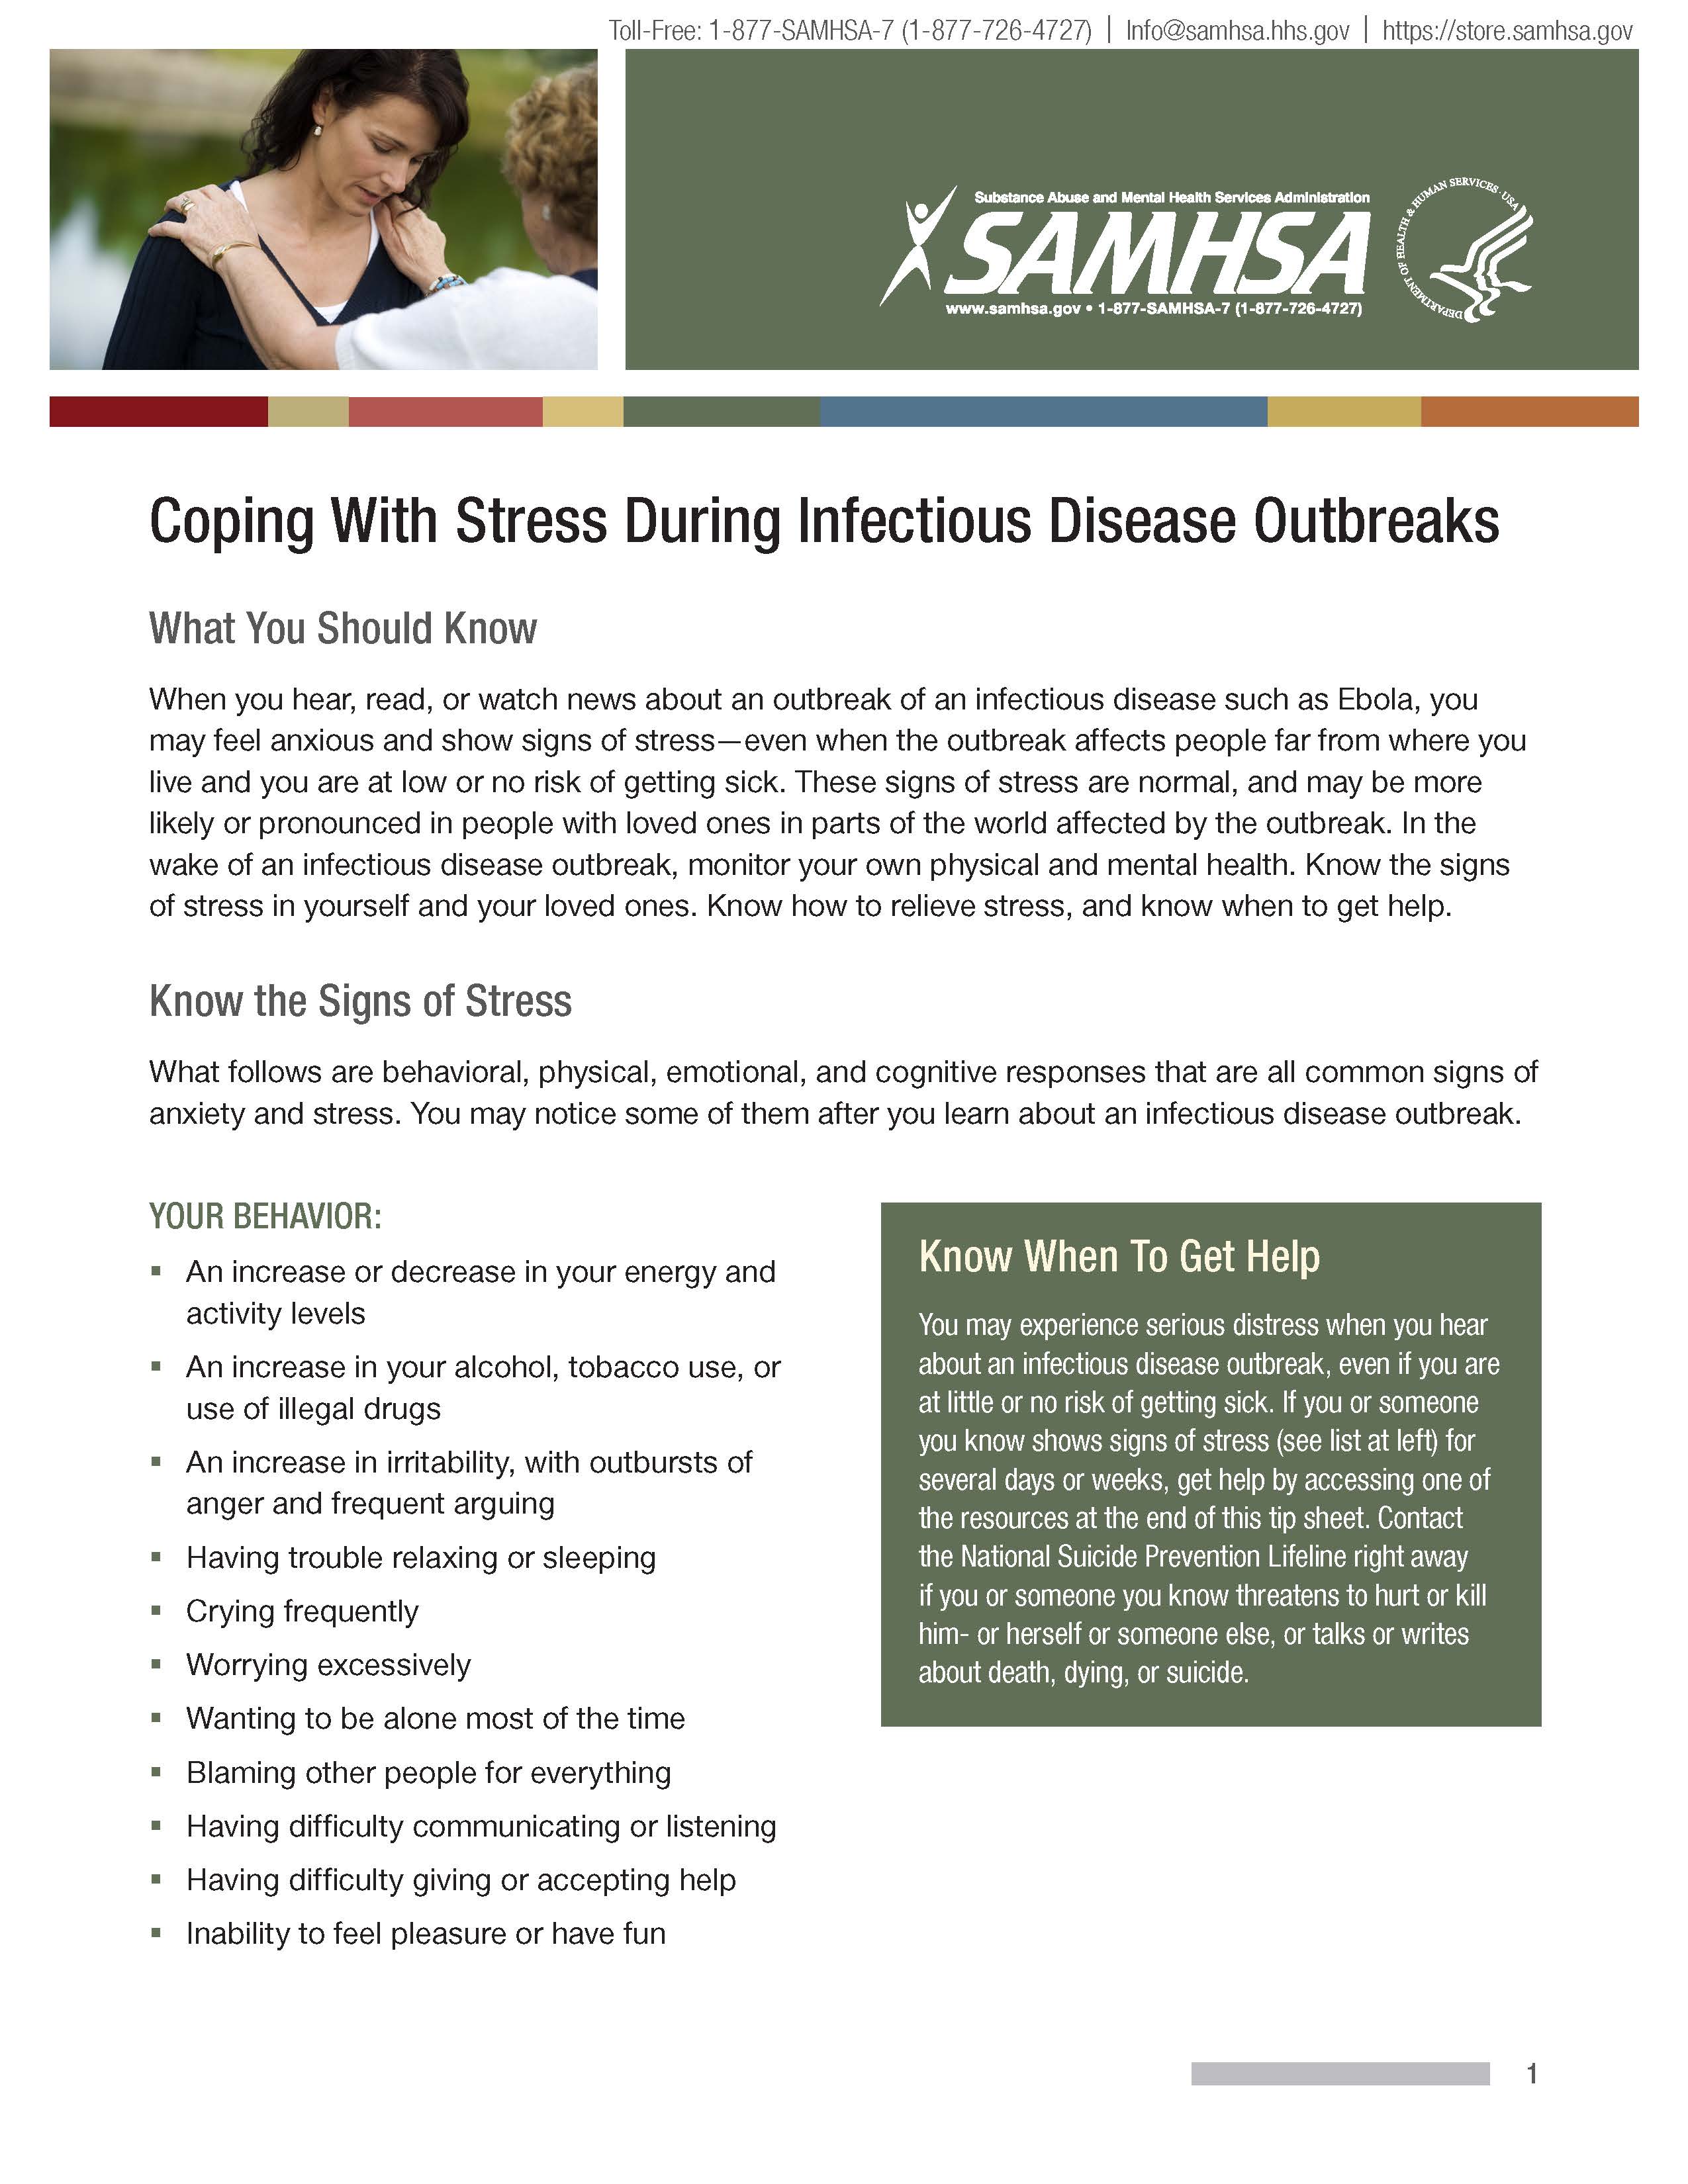 Coping with stress during an outbreak Page 1